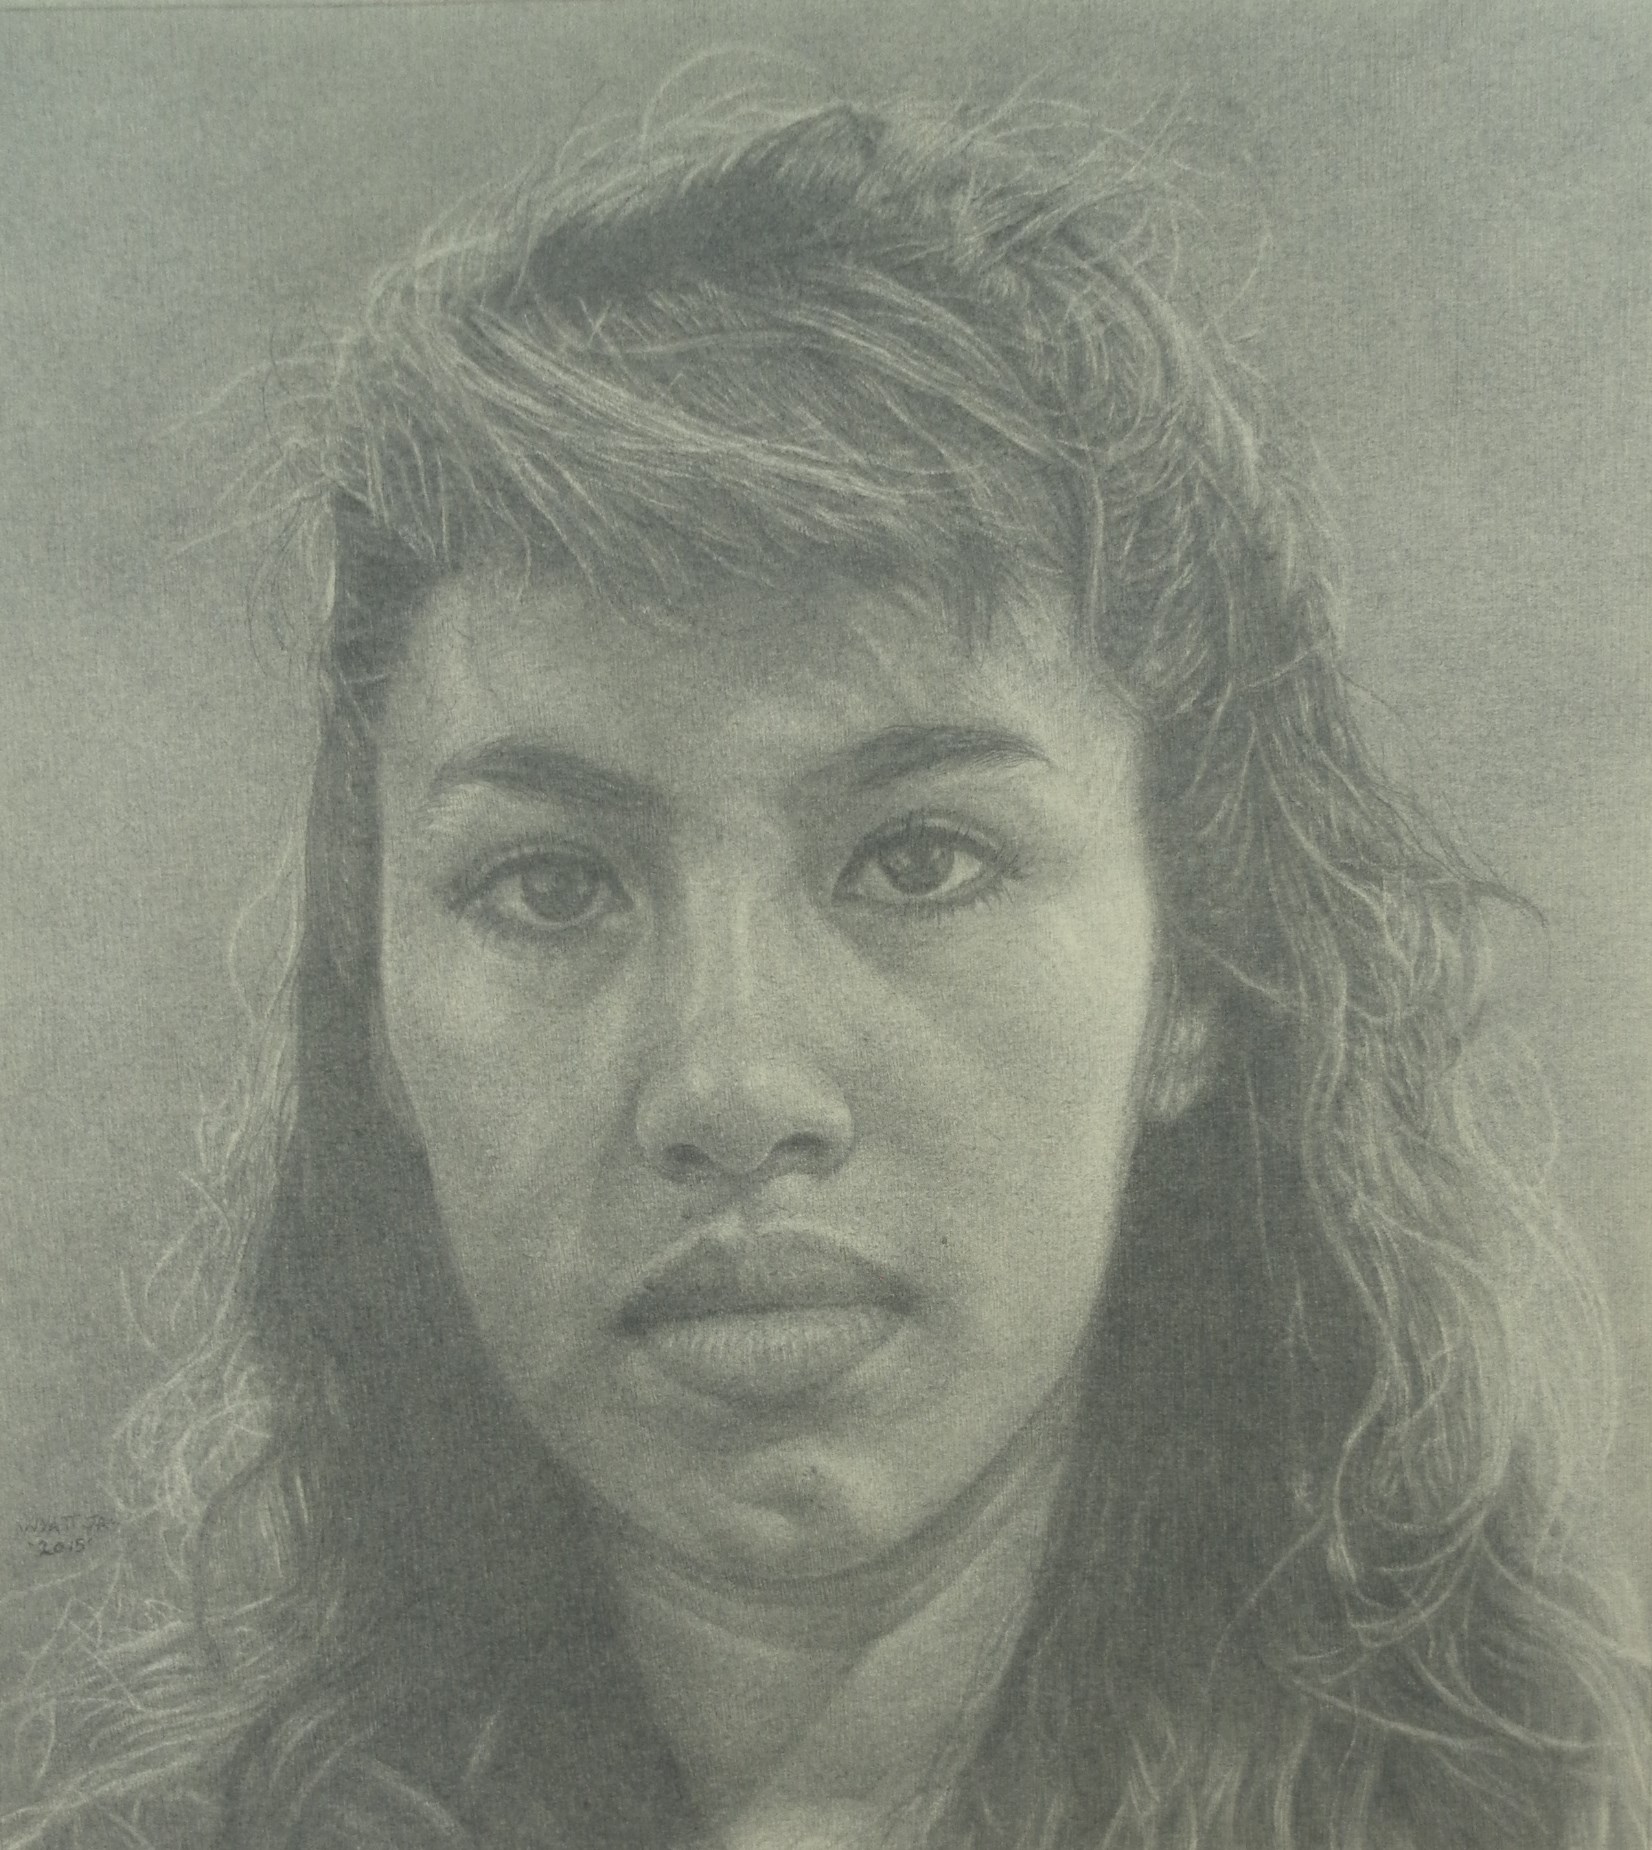   “Blanca (Drawing from the People Coming, People Going Mural located at Wilshire/Western Subway Station, Los Angeles, CA)”    2015 Pencil on wove paper   10   ⅝&nbsp;   x 11 ⅝ inches   © Richard Wyatt Jr.  